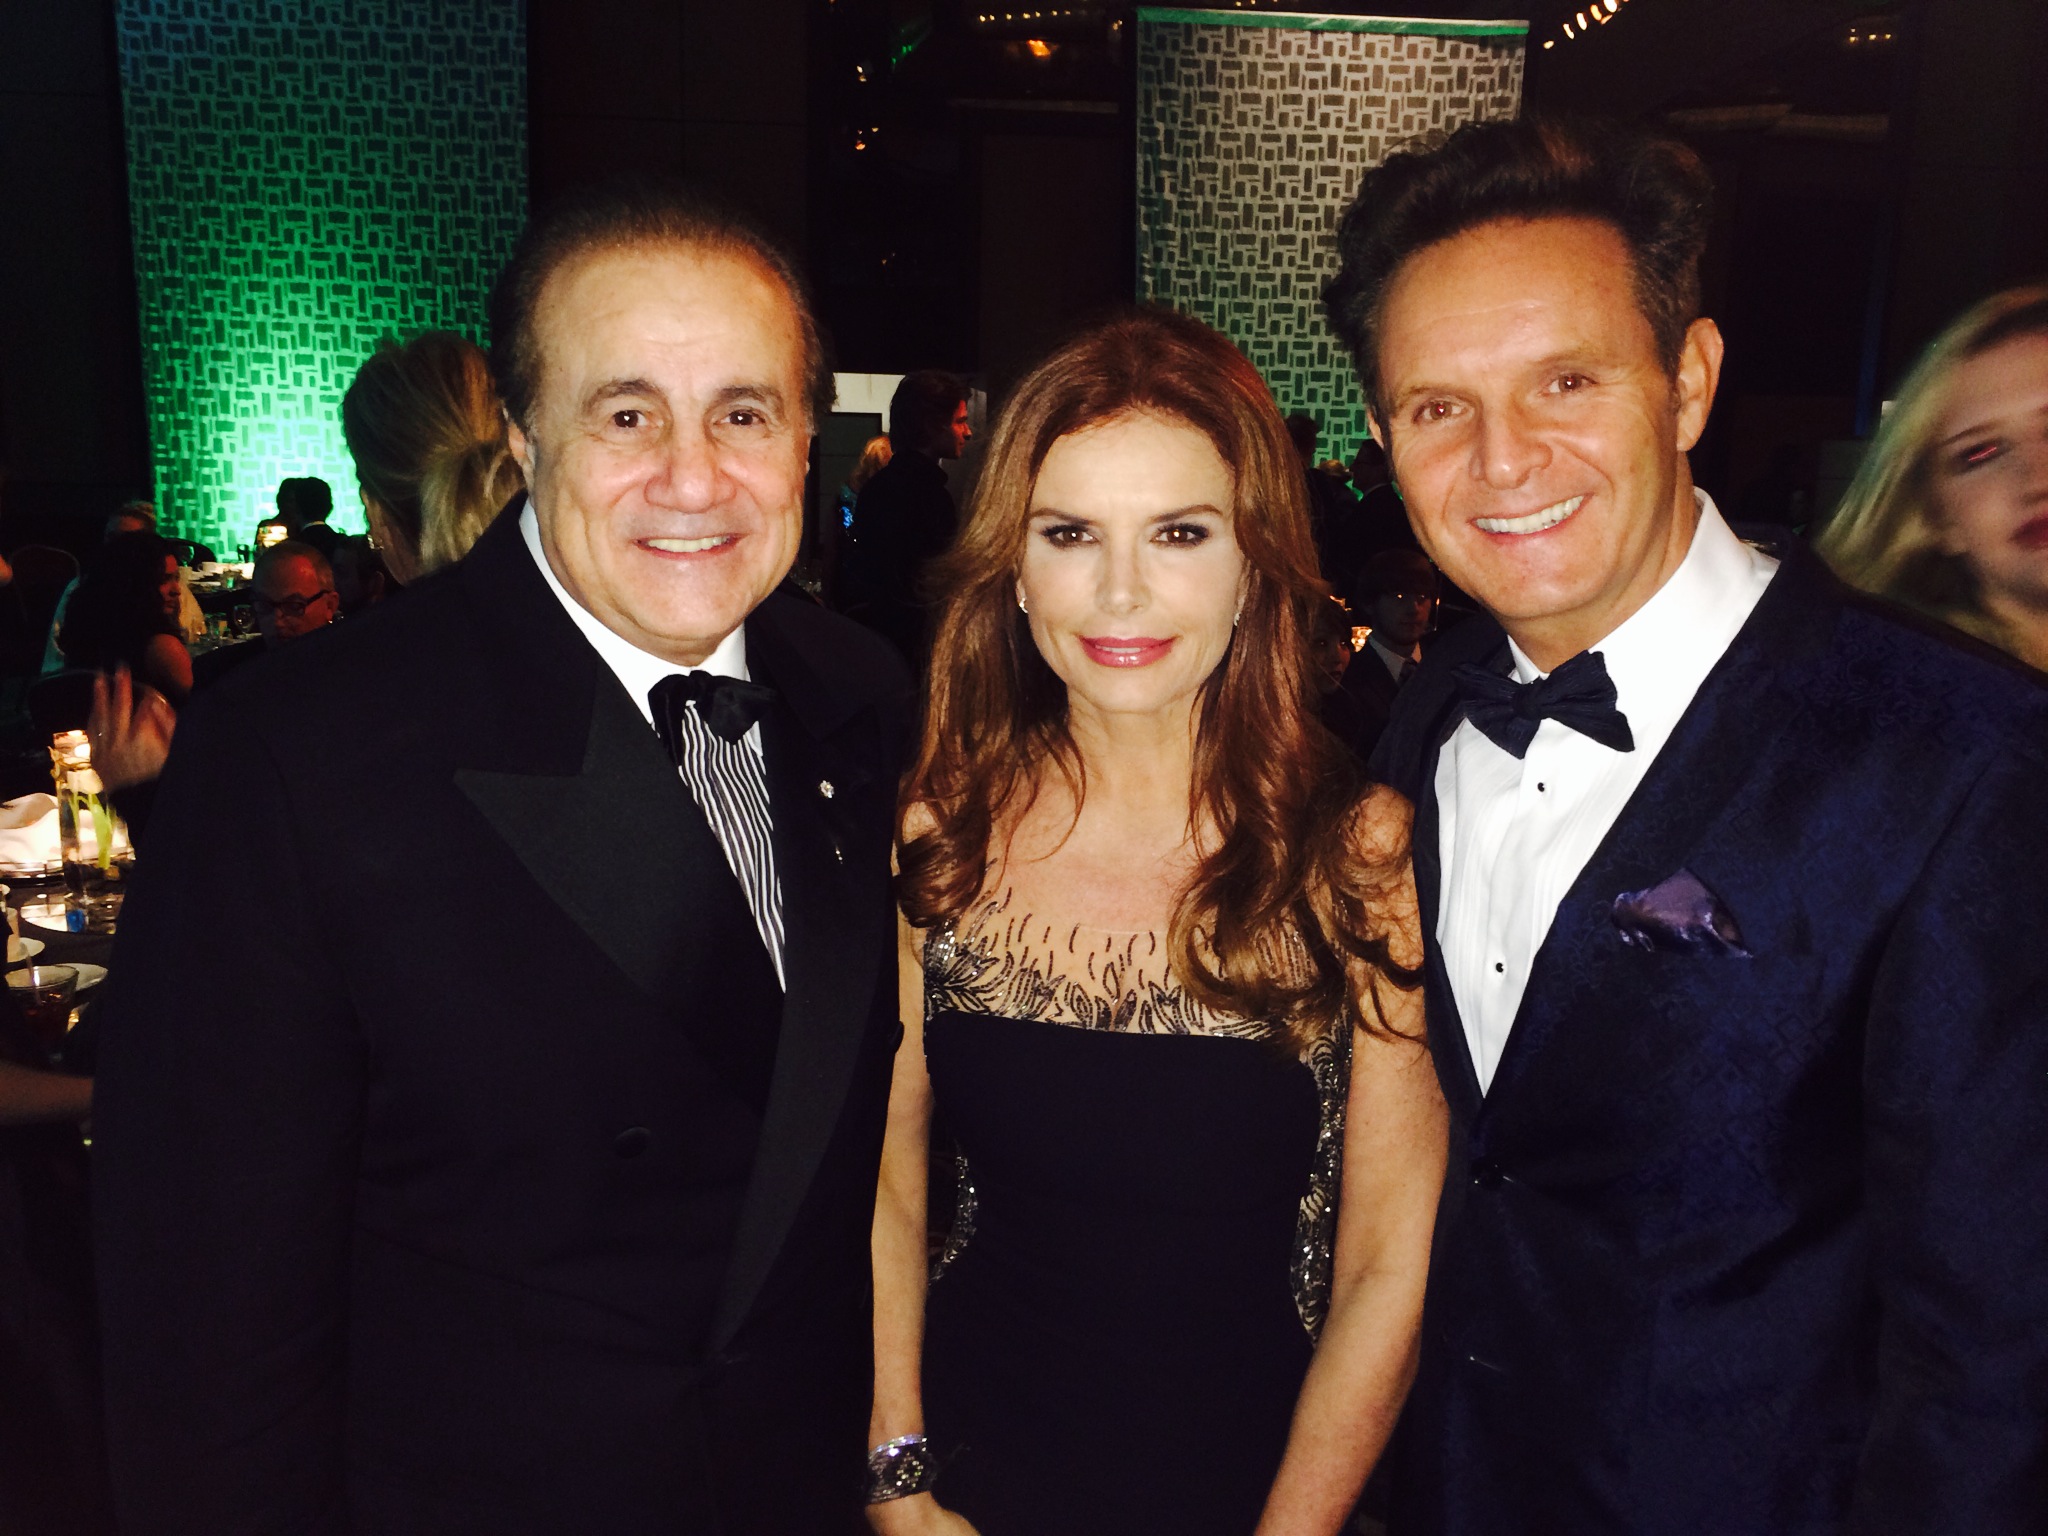 Executive Producer Larry Thompson (L) with Roma Downey (Center), and Mark Burnett (R) at the 22nd Annual Movieguide Awards held at the Sierra Ballroom at the Universal Hilton, Universal City, CA on February 7, 2014.